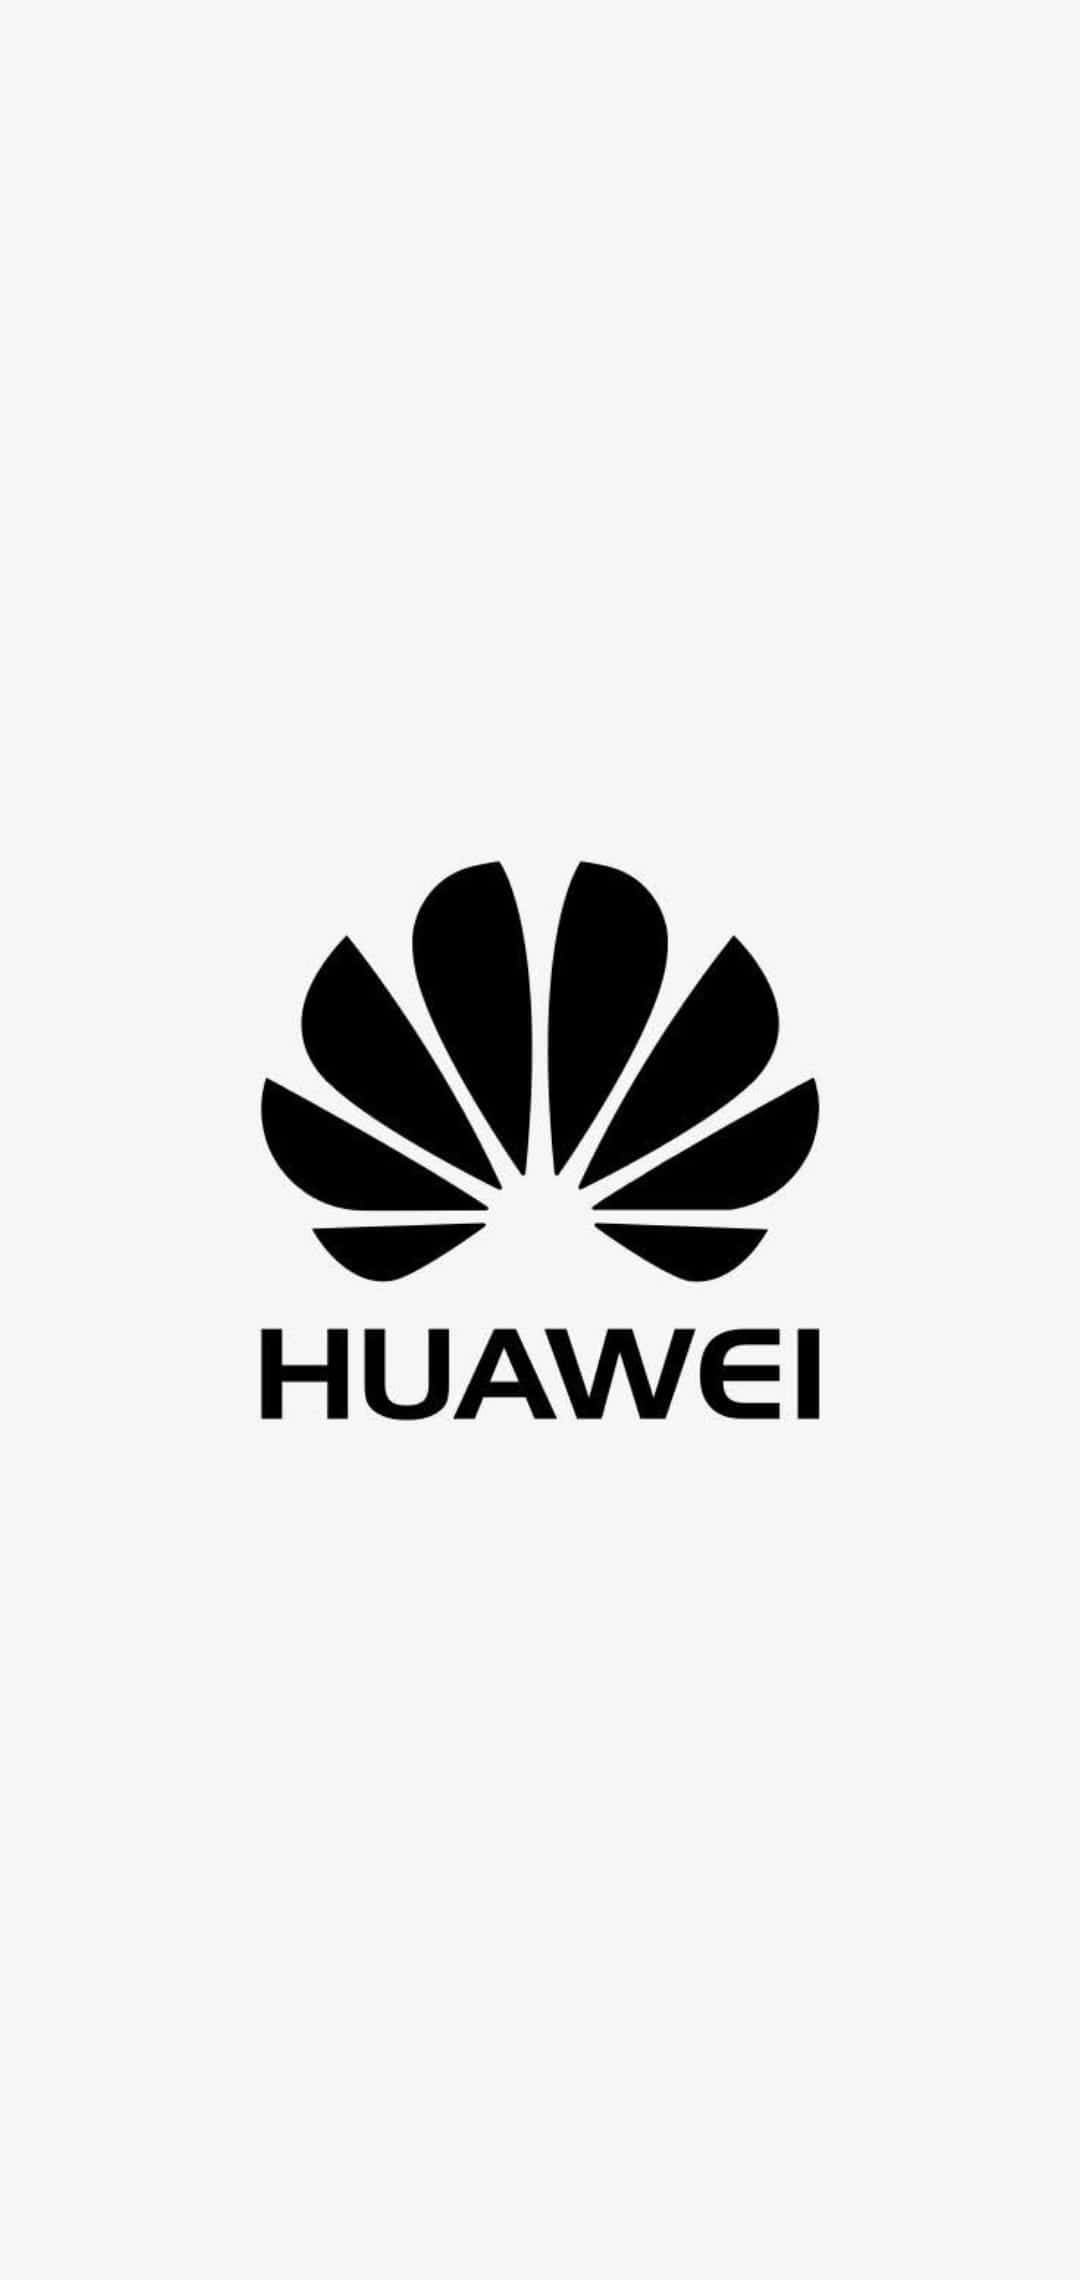 An iconic Huawei logo displayed against a tech-inspired graphic backdrop